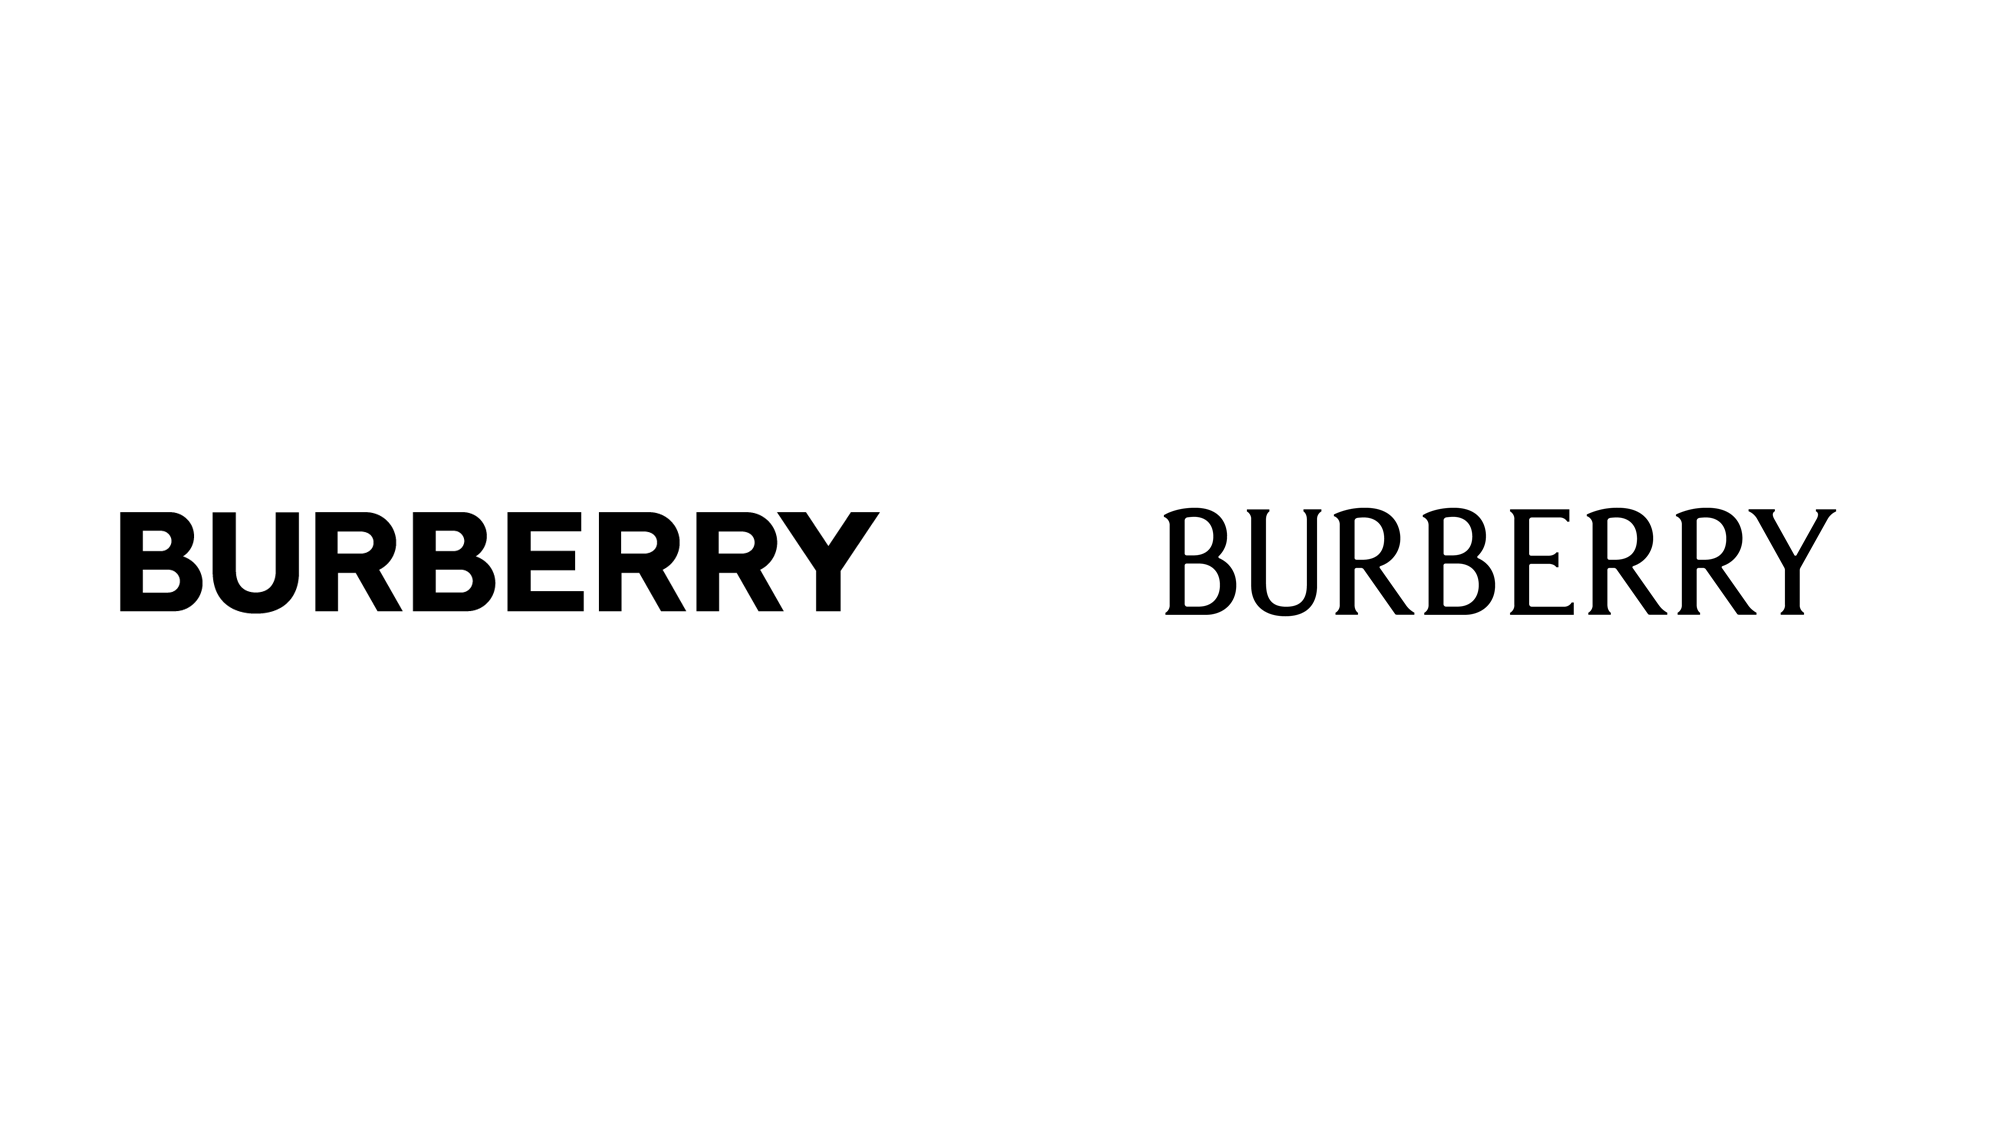 Actualizar 36+ imagen burberry logo before and after - Abzlocal.mx